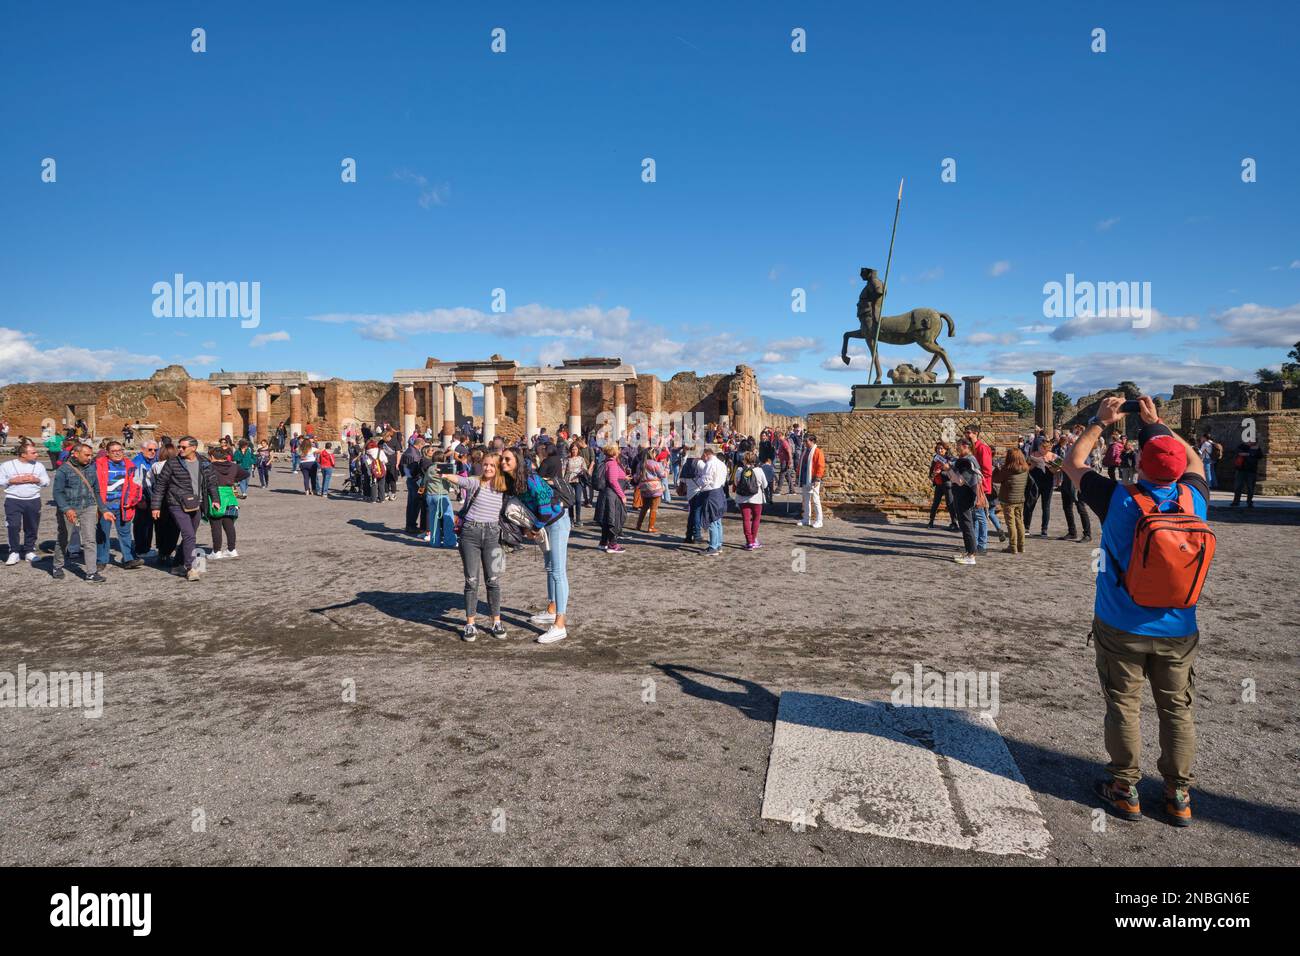 Groups of tourists, visitors pack, crowd the forum area, busy posing for photographs, selfies. At Pompeii Archaeological Park near Naples, Italy. Stock Photo